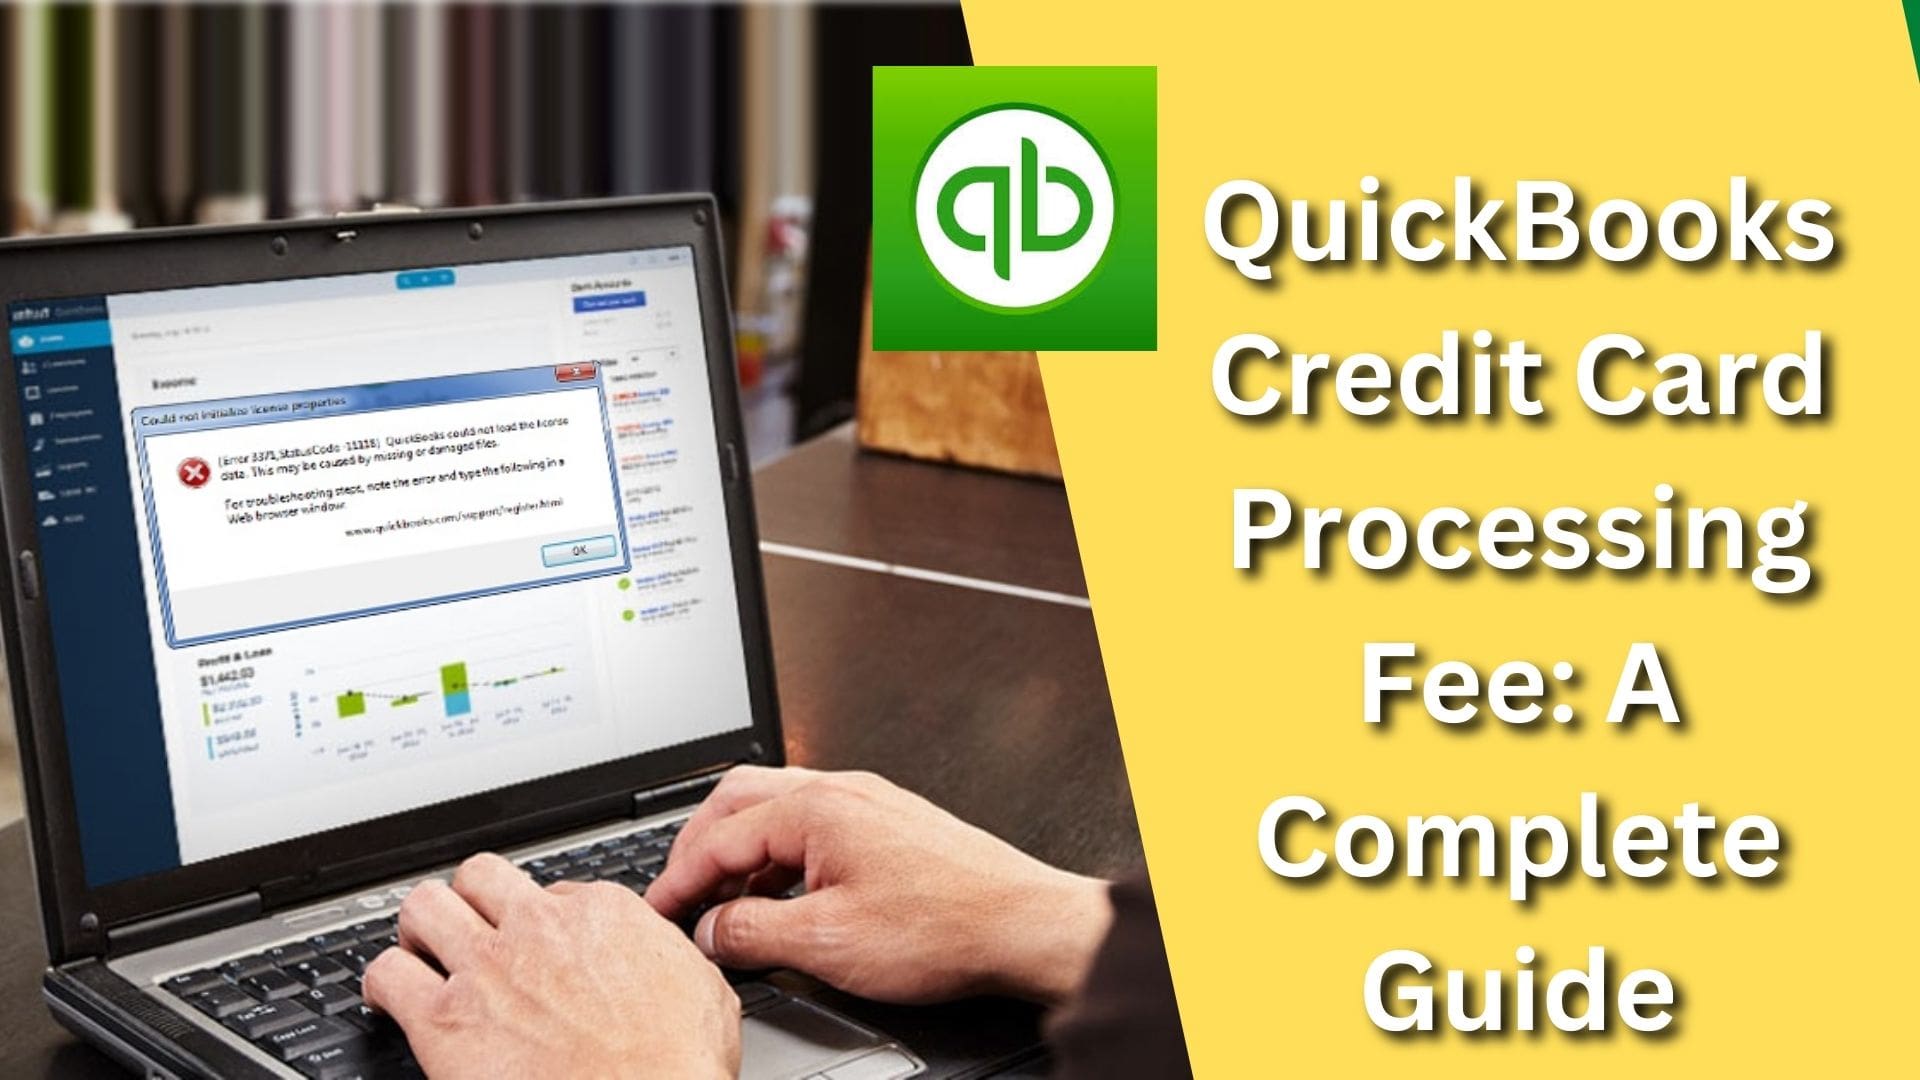 QuickBooks Credit Card Processing Fee: Full Explanation